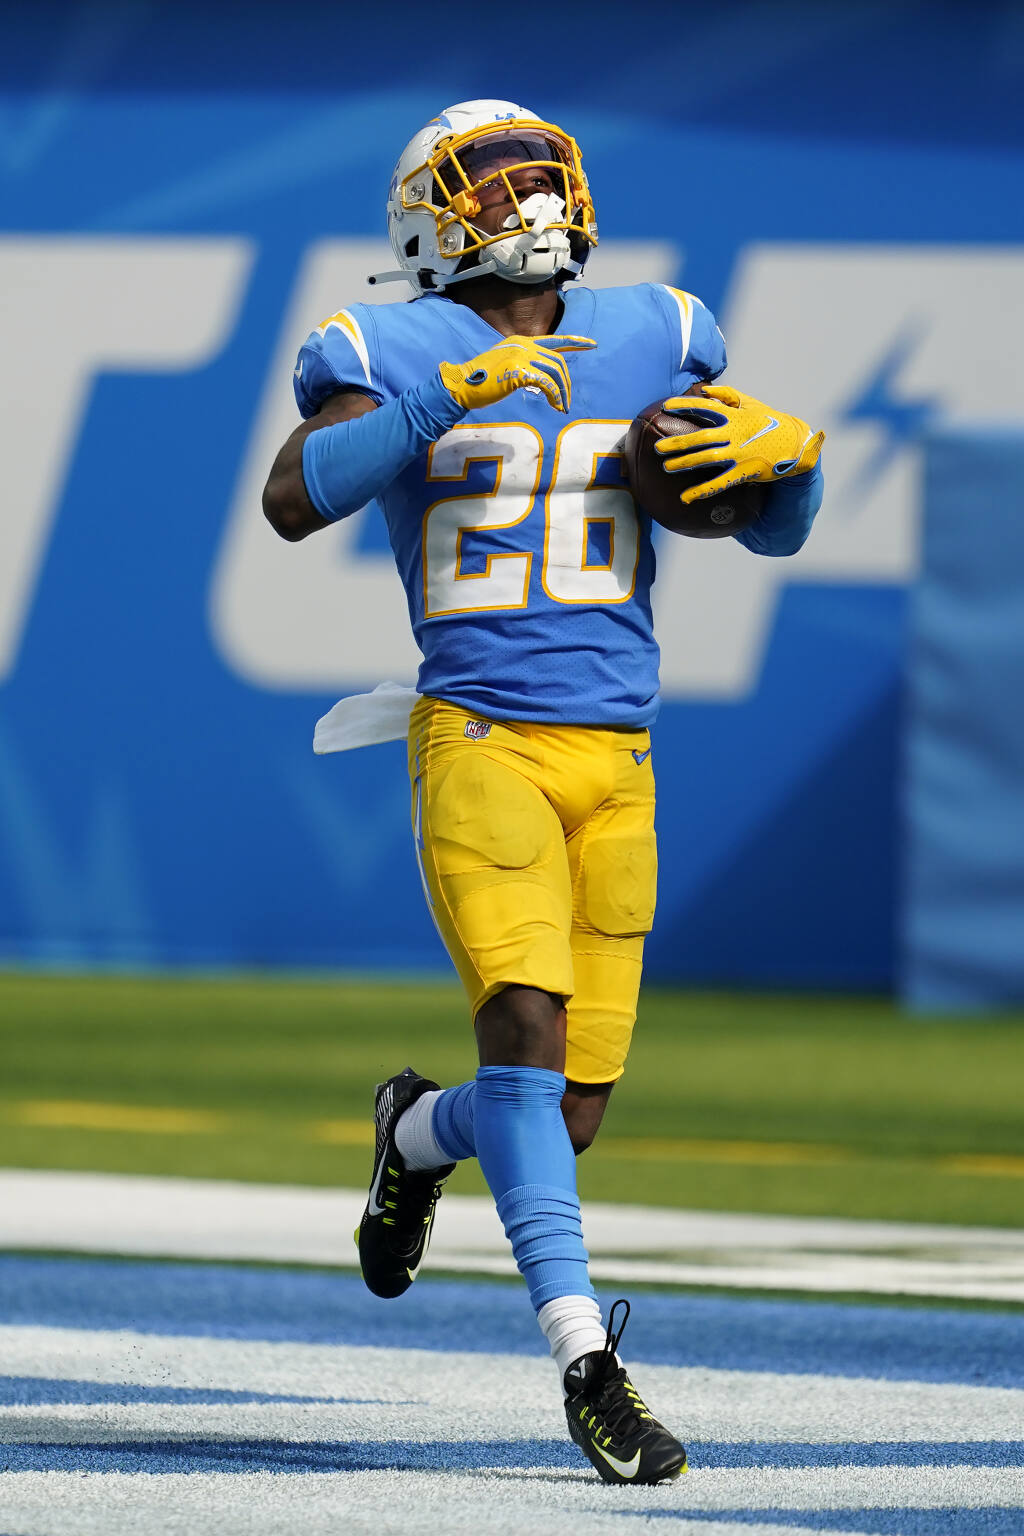 Herbert, Chargers trying to weather early season injuries - The